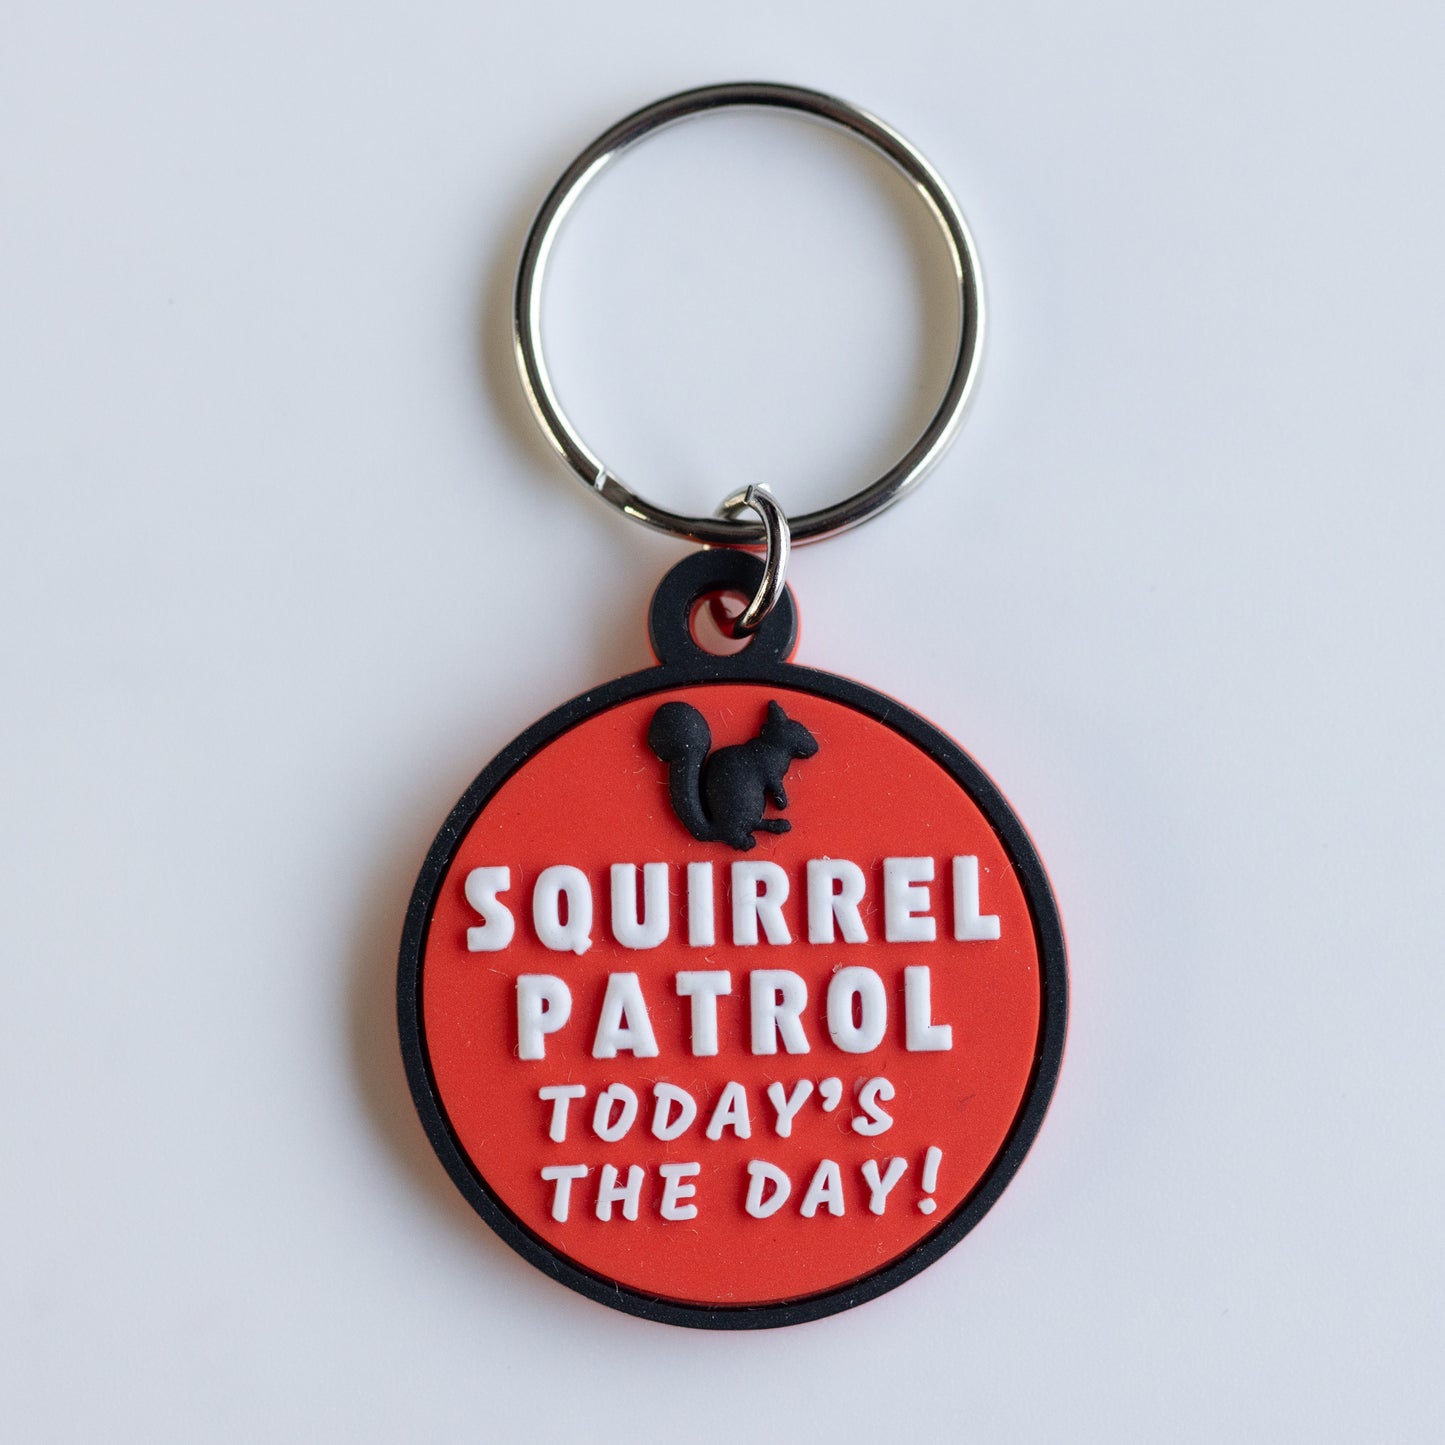 Dog Collar Charm - Squirrel Patrol Today’s the Day!